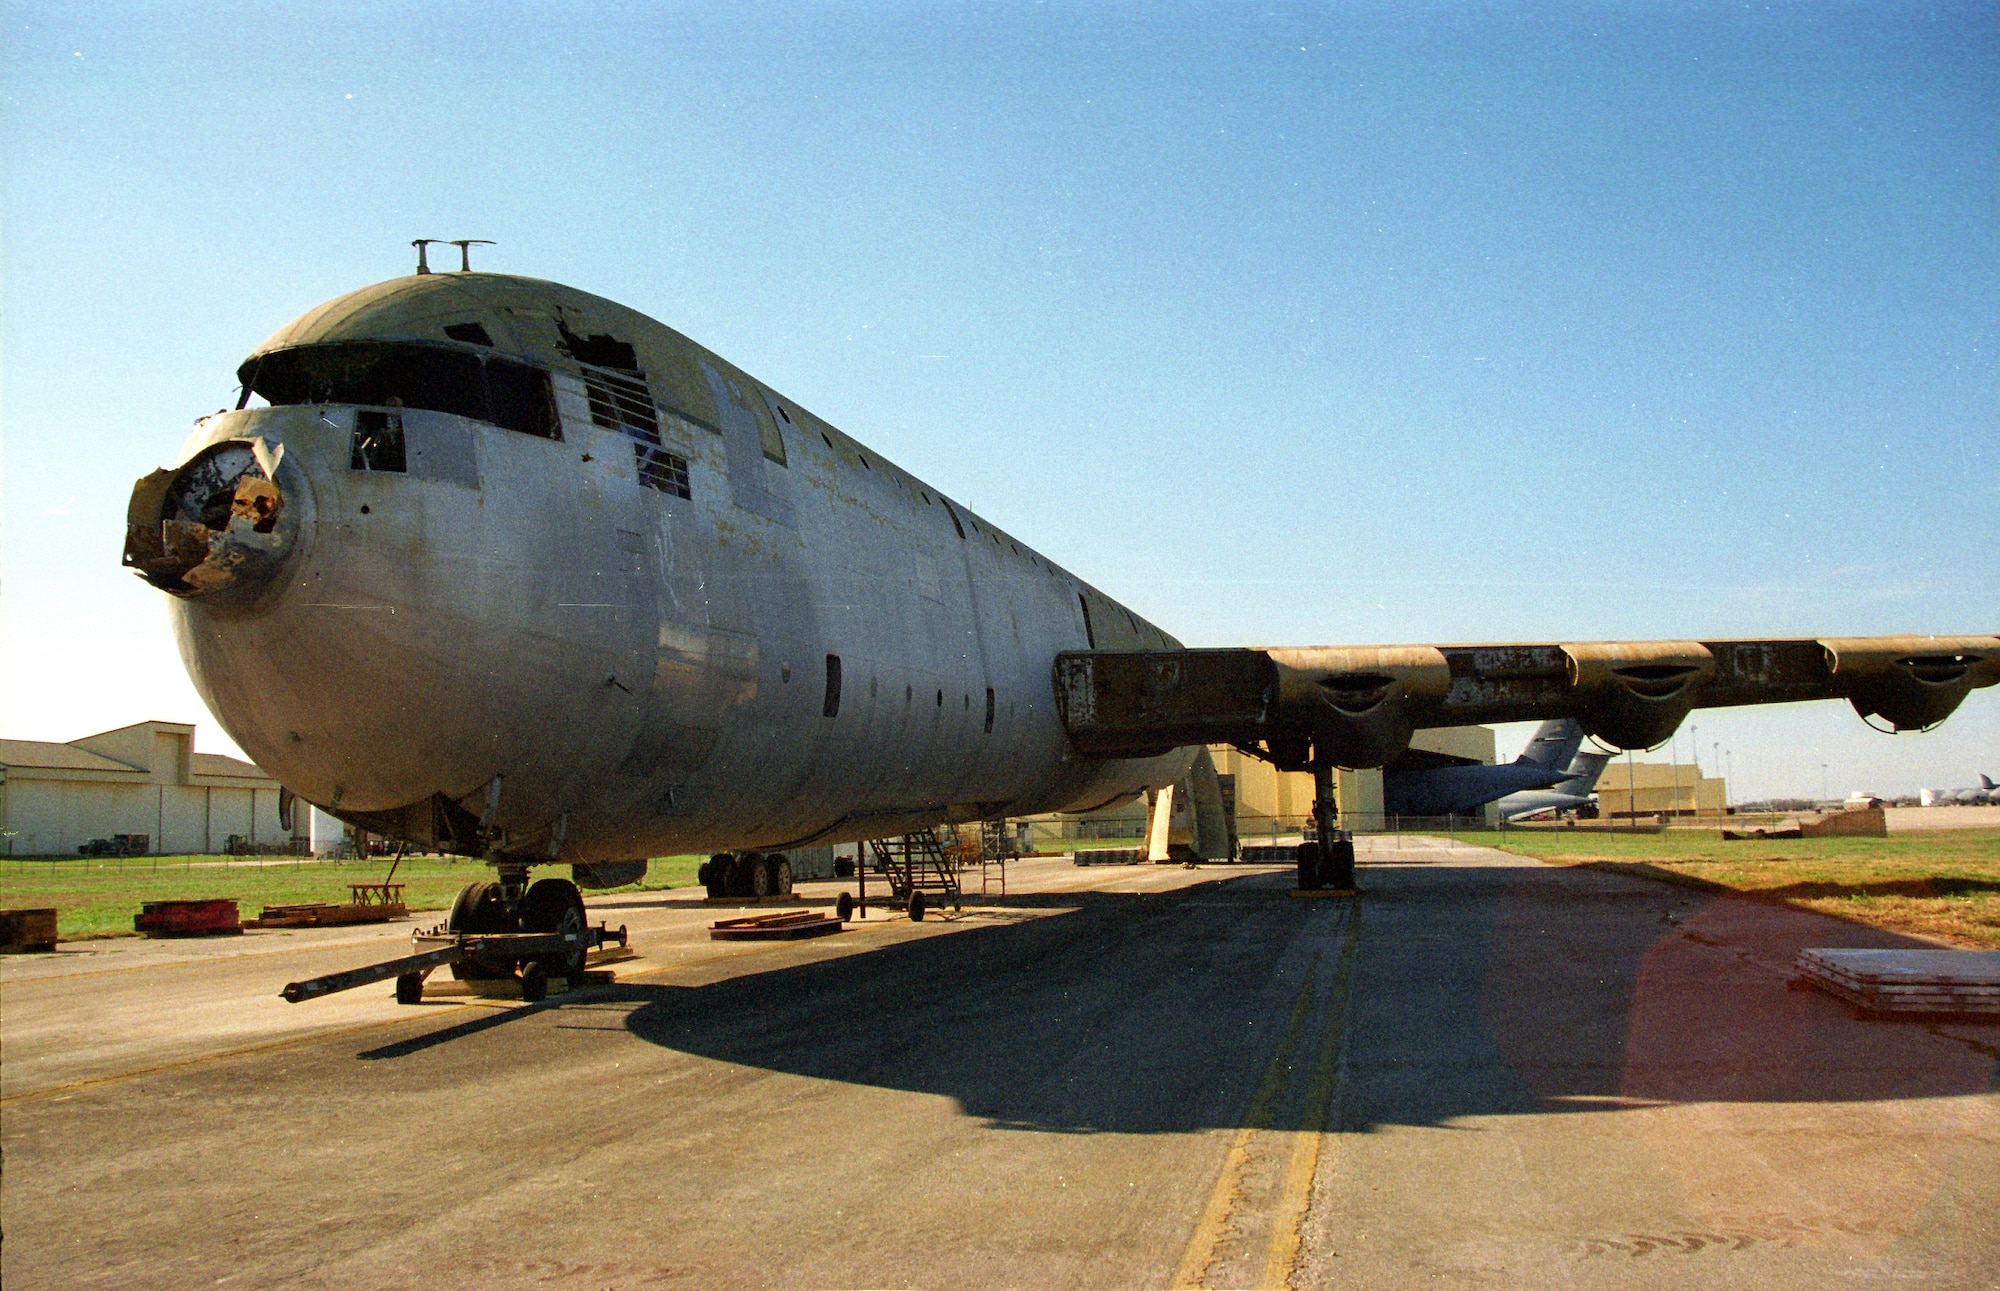 LACKLAND AIR FORCE BASE, Texas -- The XC-99 sits on the ramp at the Kelly Annex to Lackland after Phase 1 of the dismantling process removed engines, doors, access panels, parts of the wings and tail section.  (U.S. Air Force photo by 1st Lt. Bruce R. Hill Jr.)